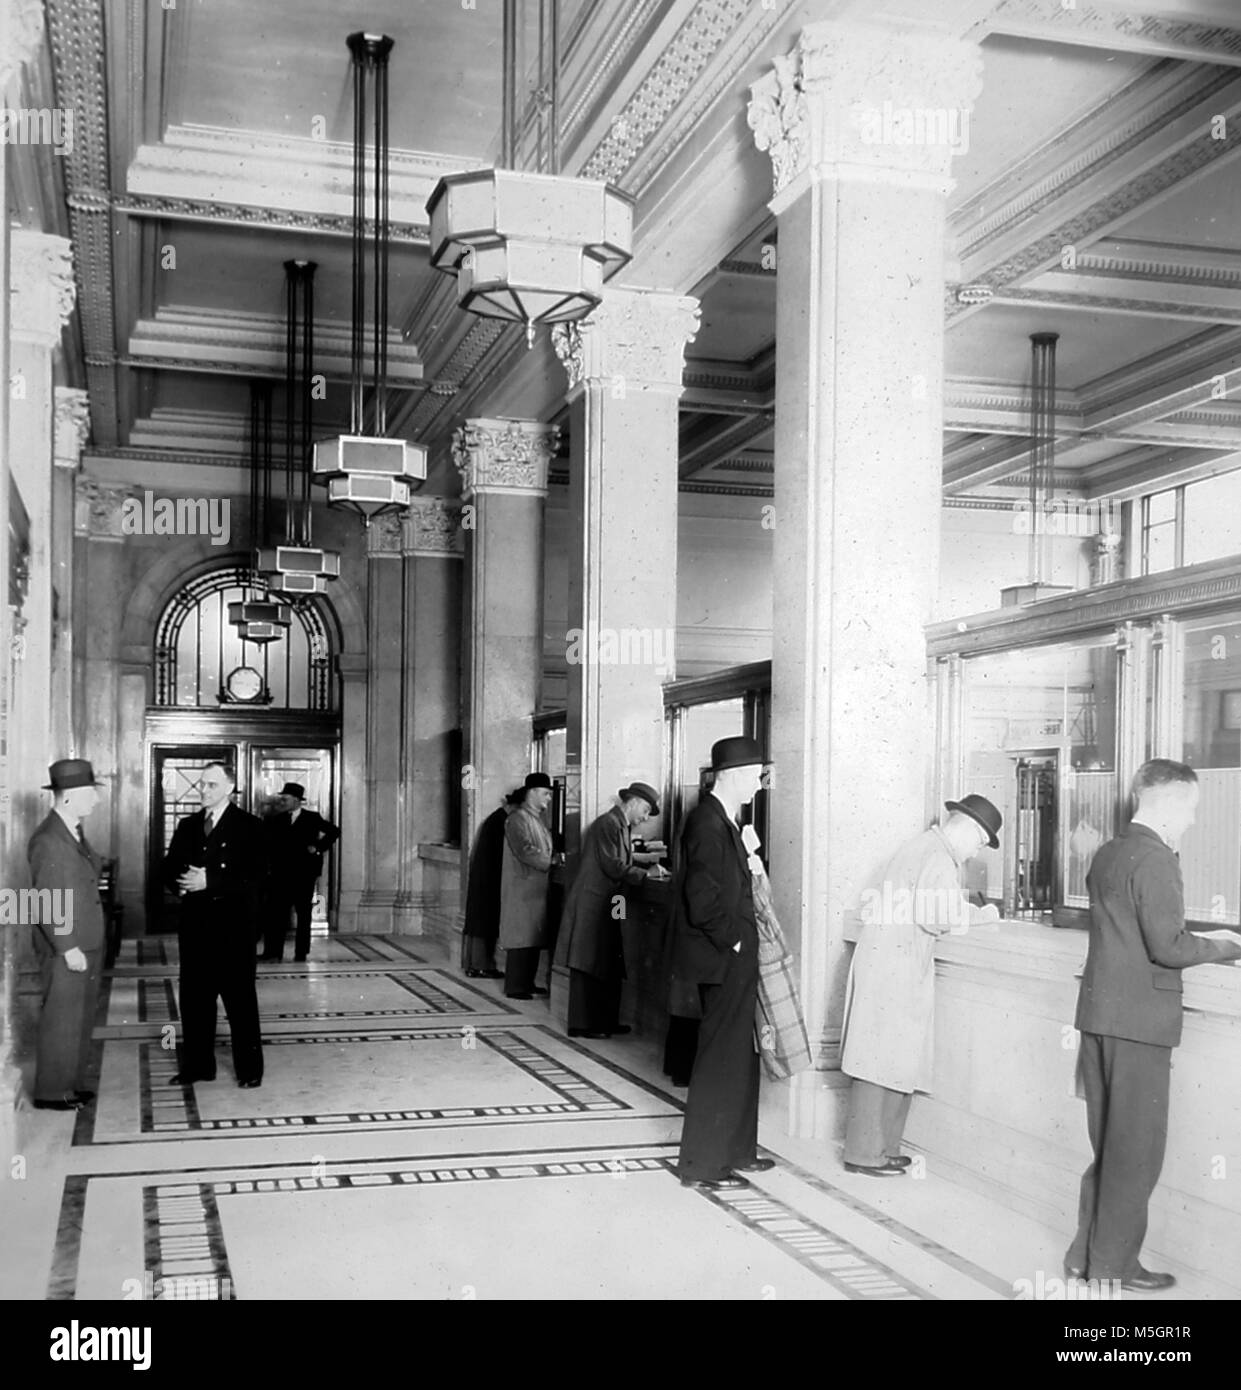 Old Pictures From The 1930s Bank